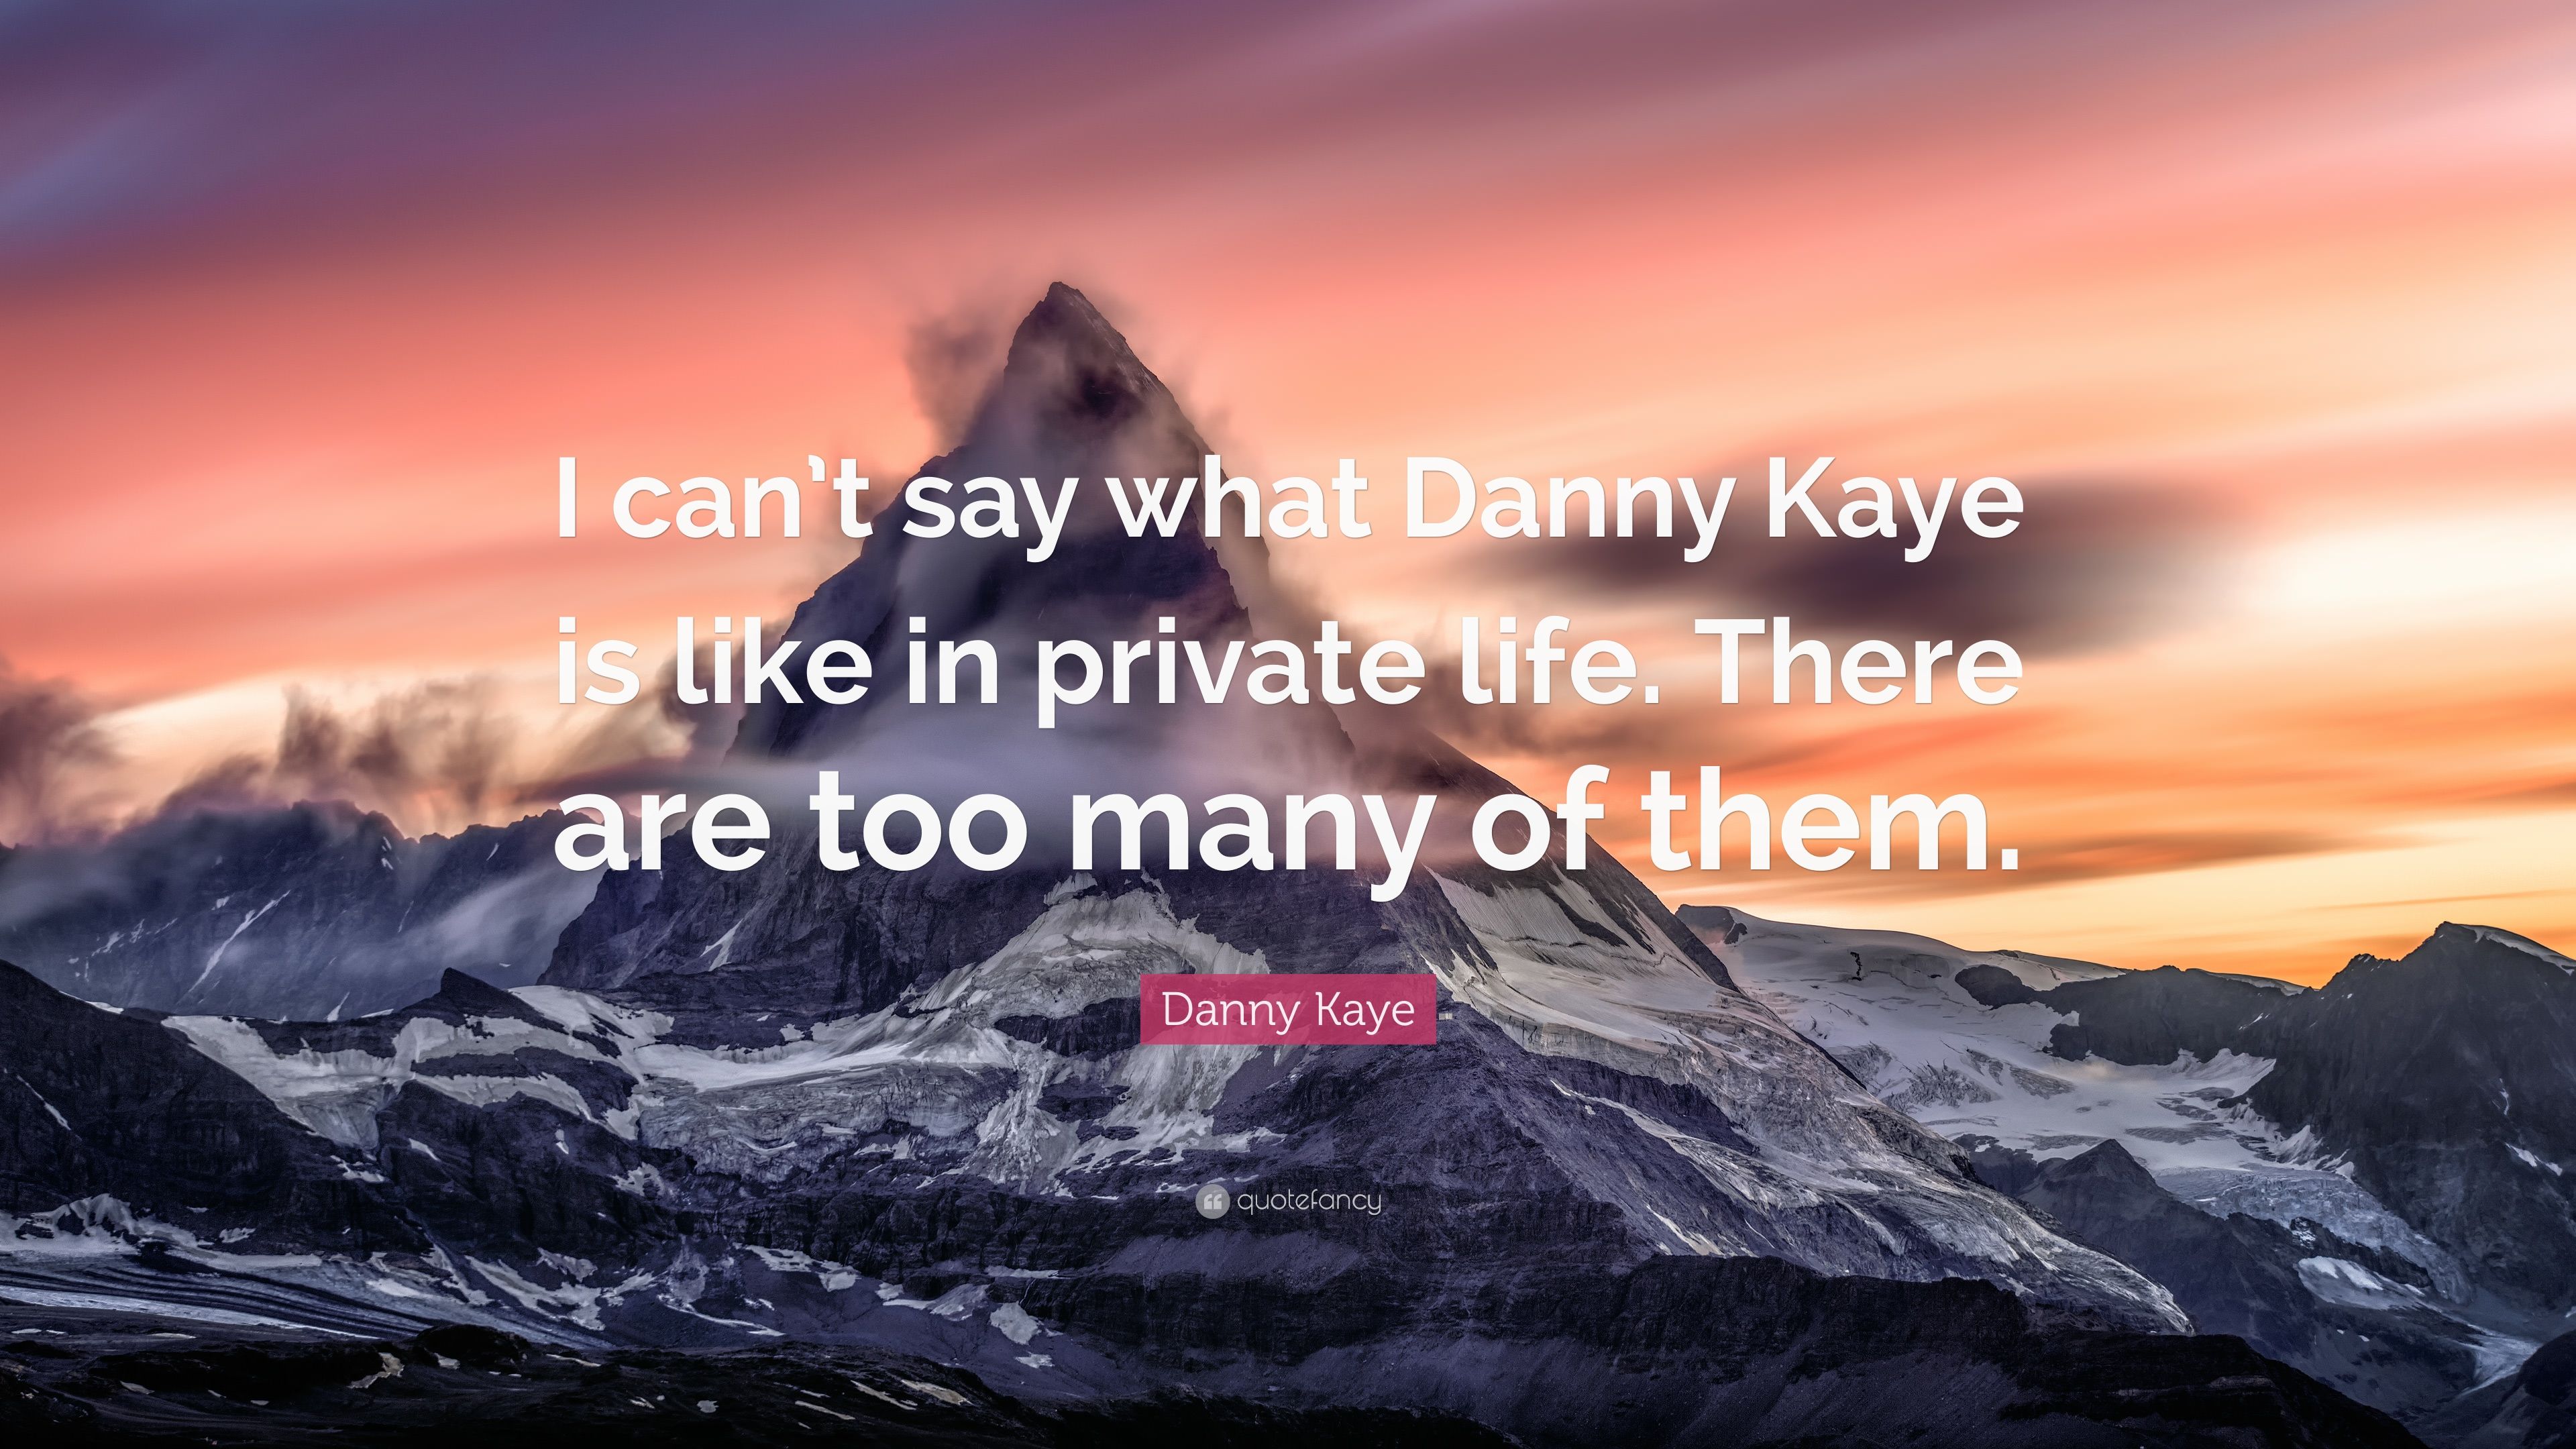 Danny kaye quote âi cant say what danny kaye is like in private life there